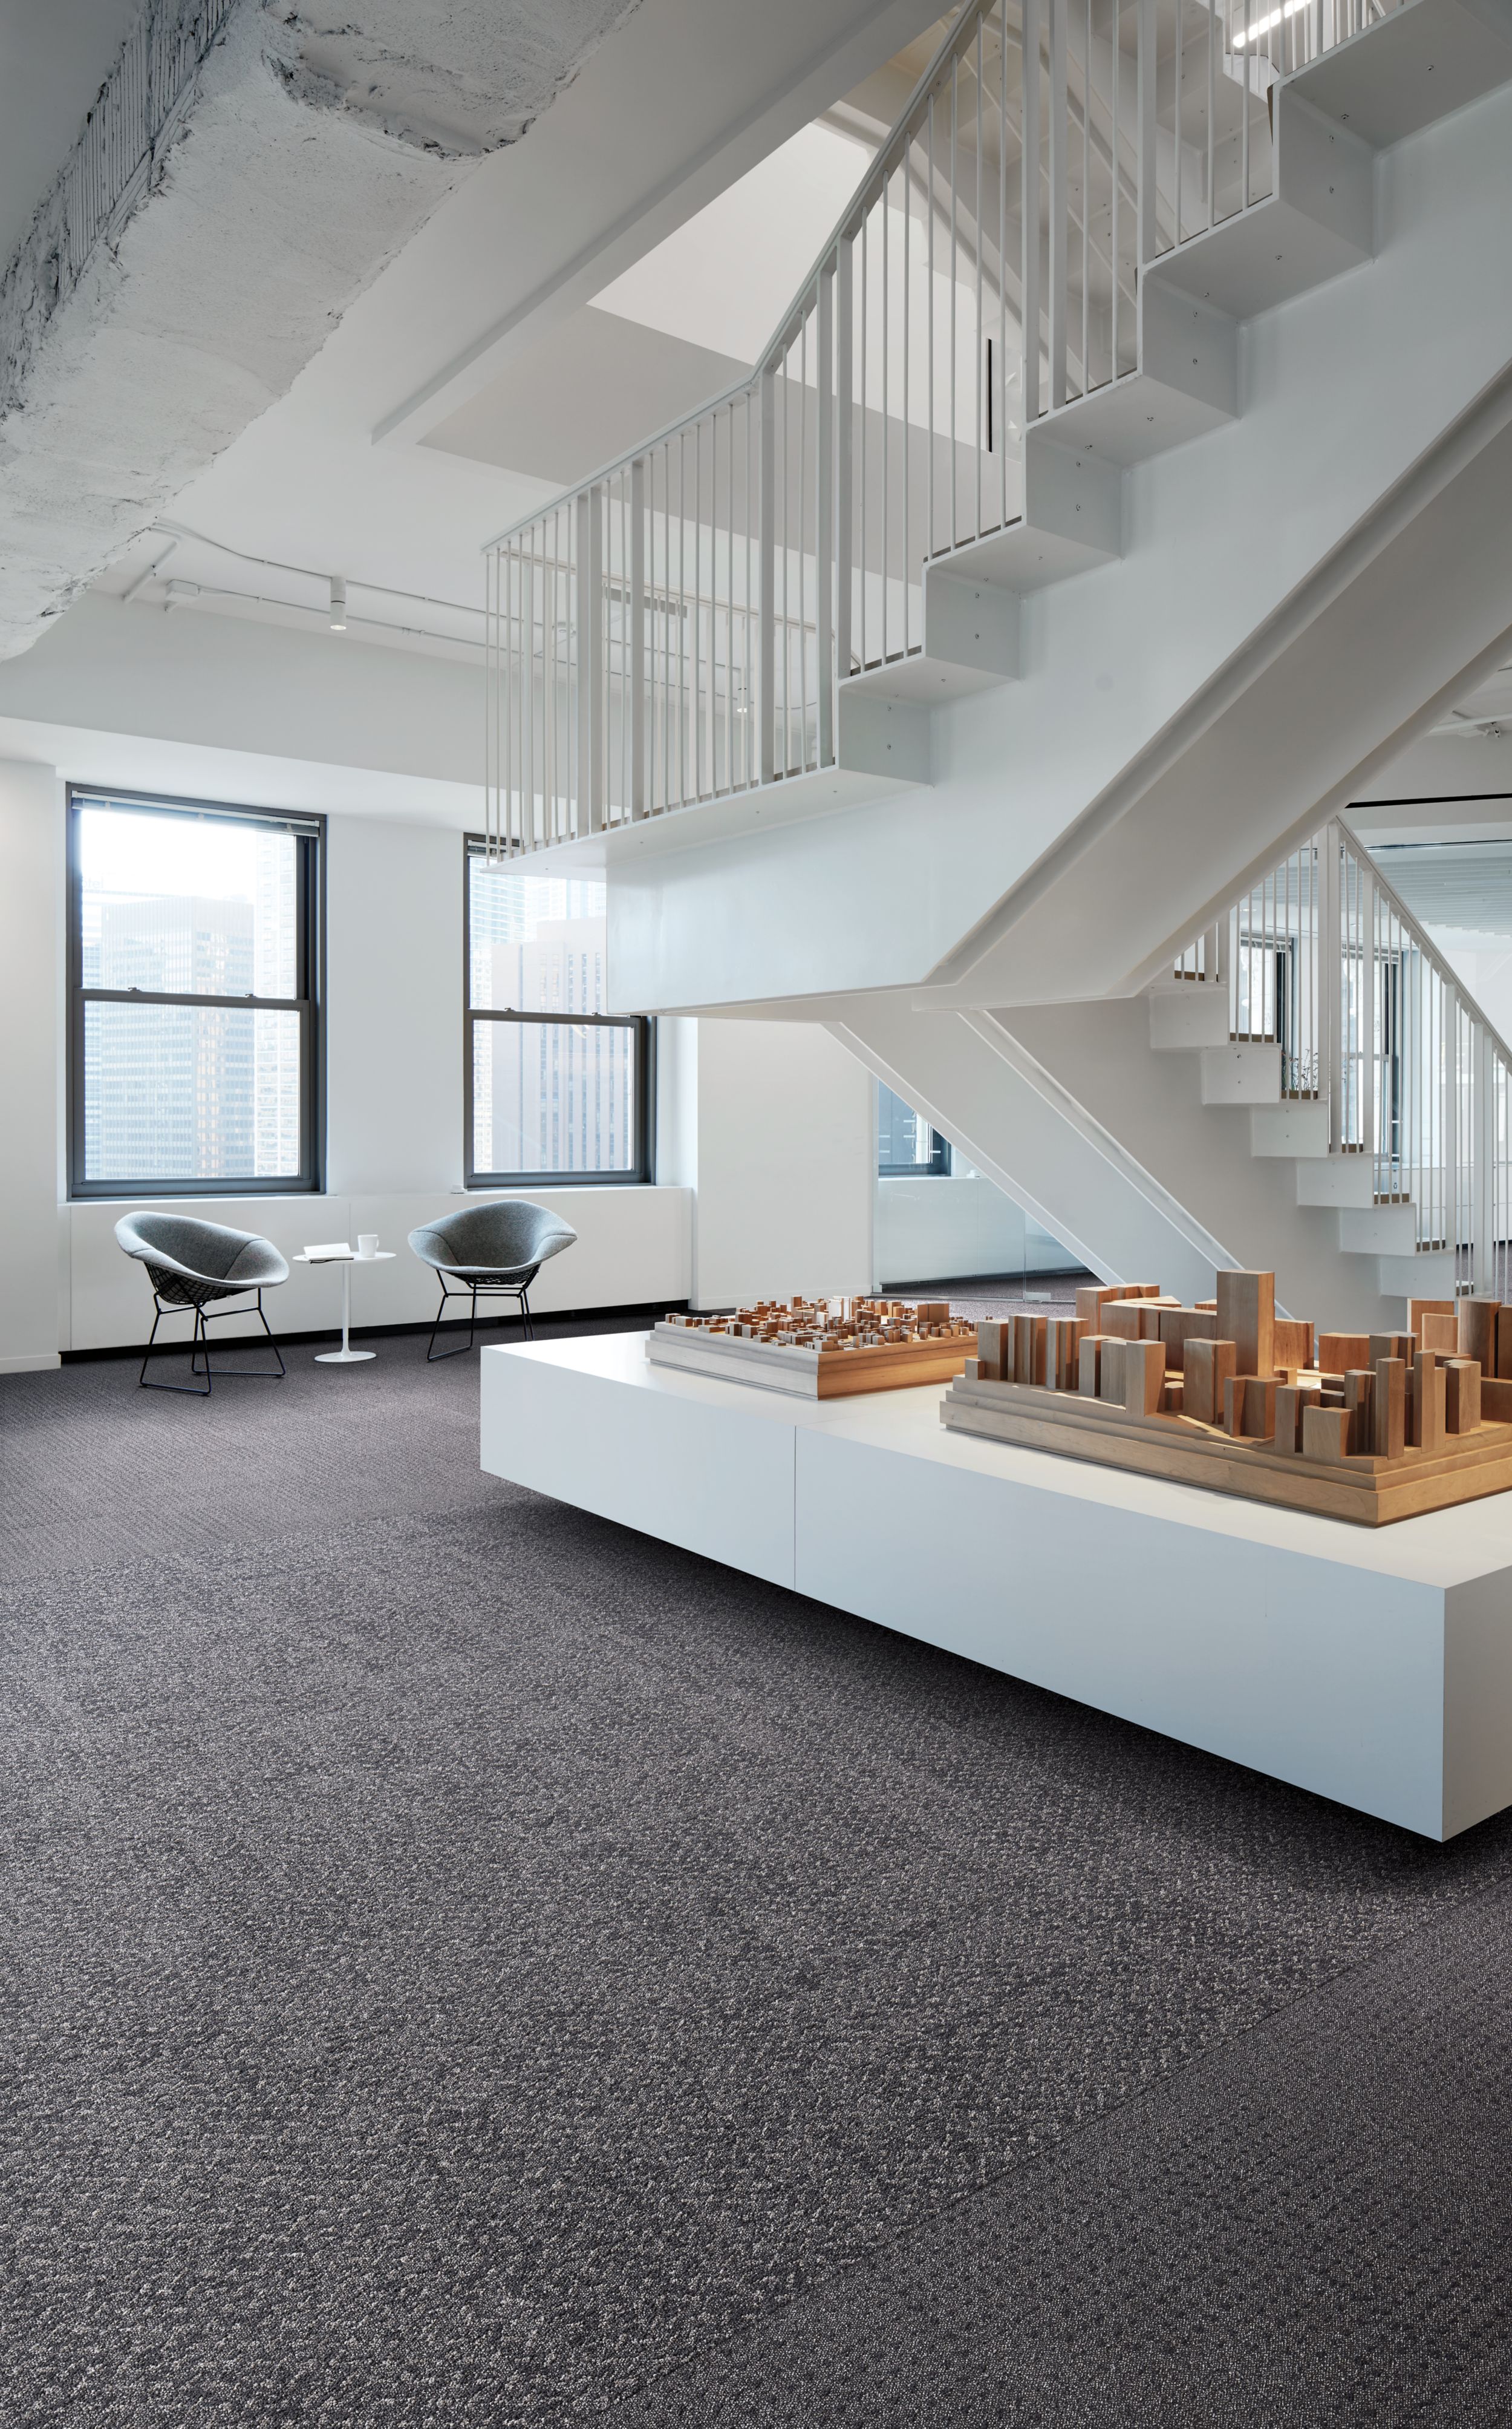 image Interface Dover Street carpet tile in office with central white staircase numéro 7